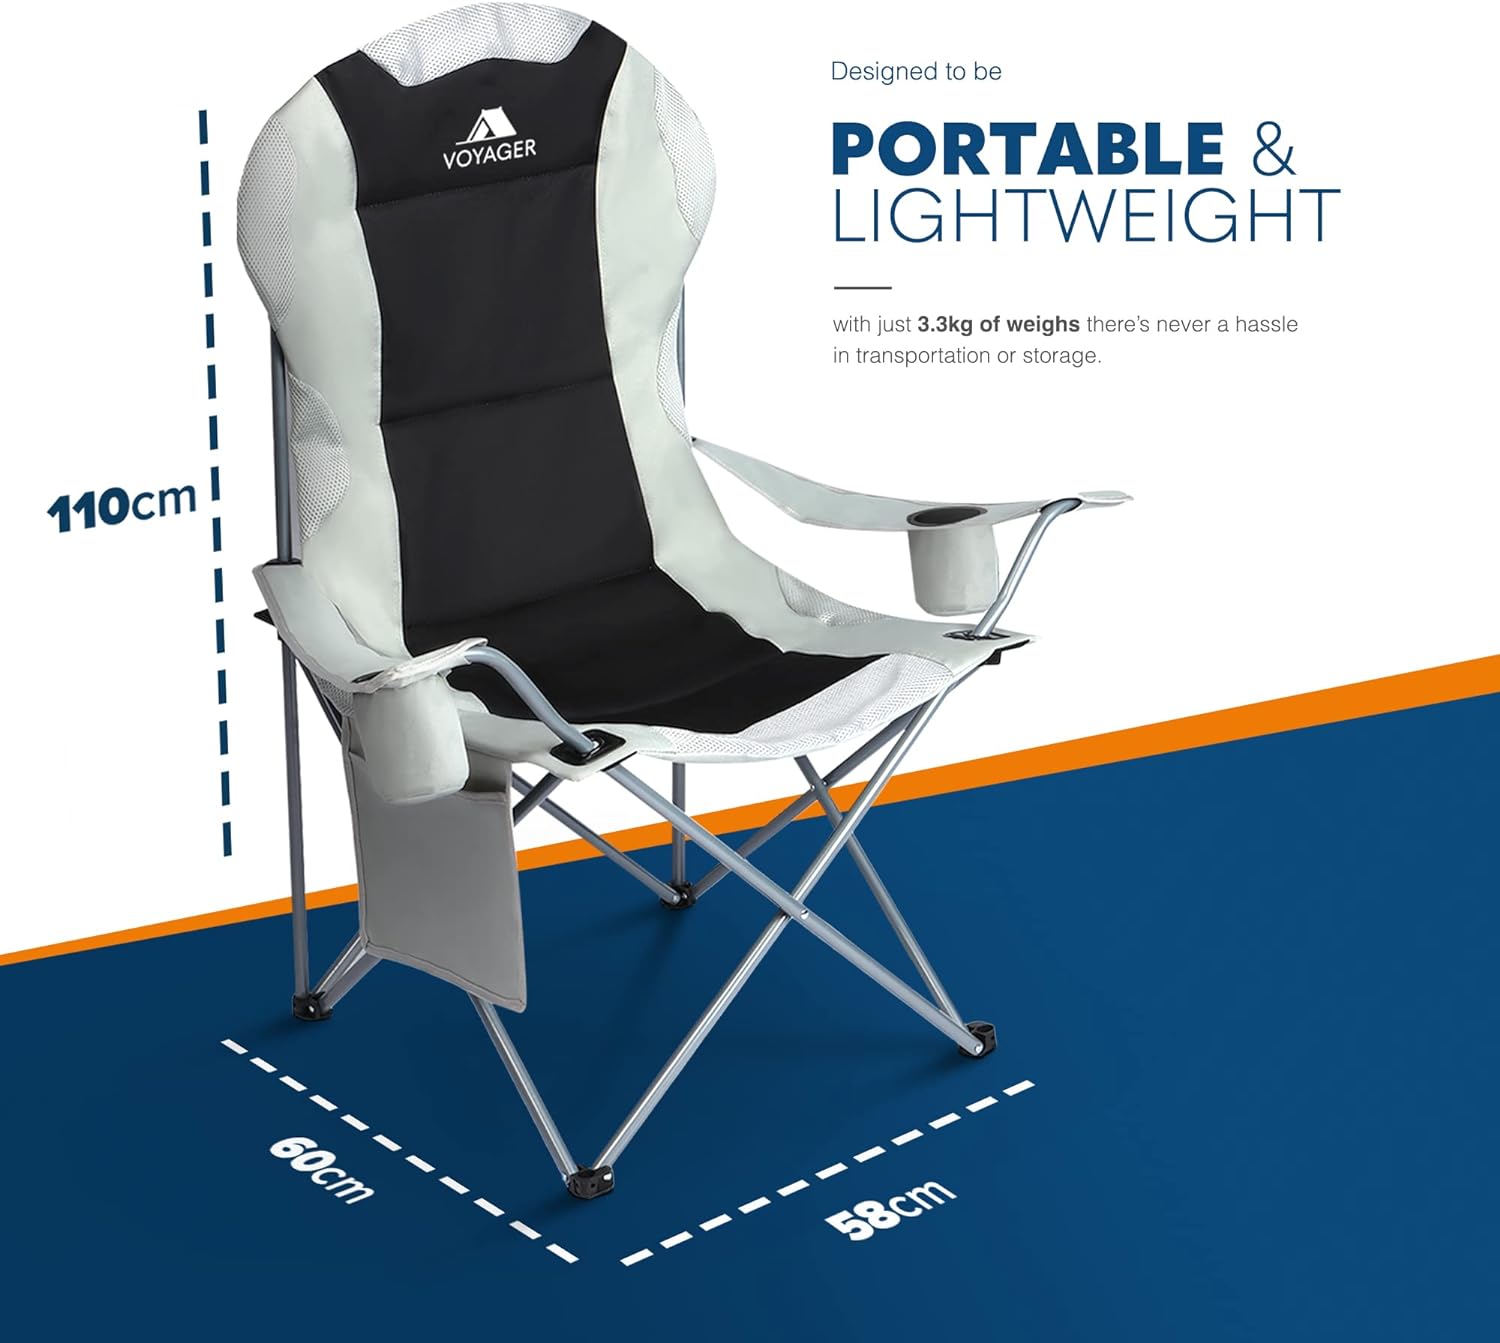 2-Pack Padded Camping Chair - Voyager Camping Chair - UK